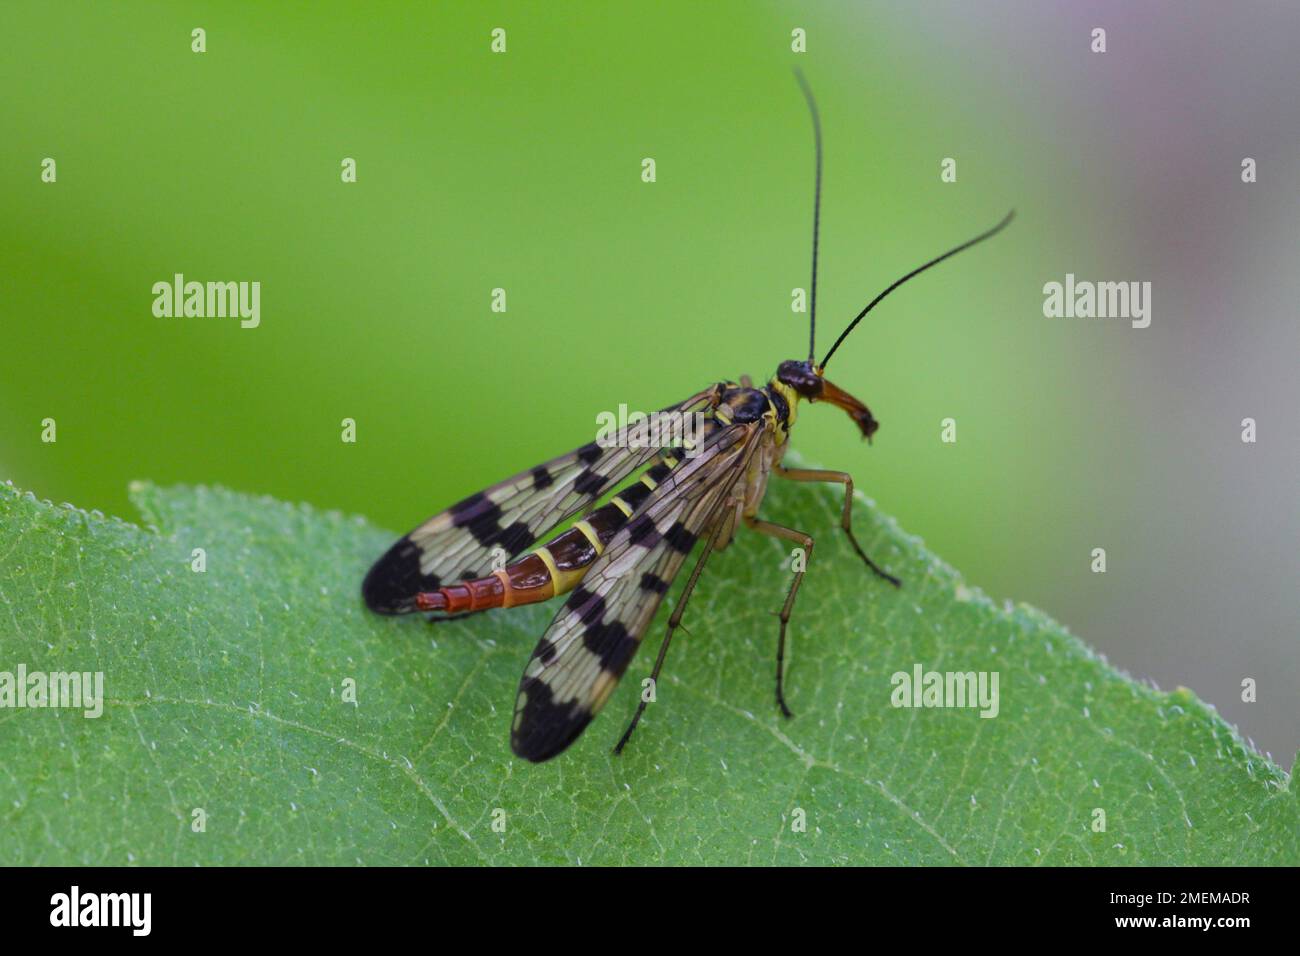 Panorpa communis is the common scorpionfly a species of scorpionfly. It’s are useful insects that eat plant pests. Stock Photo